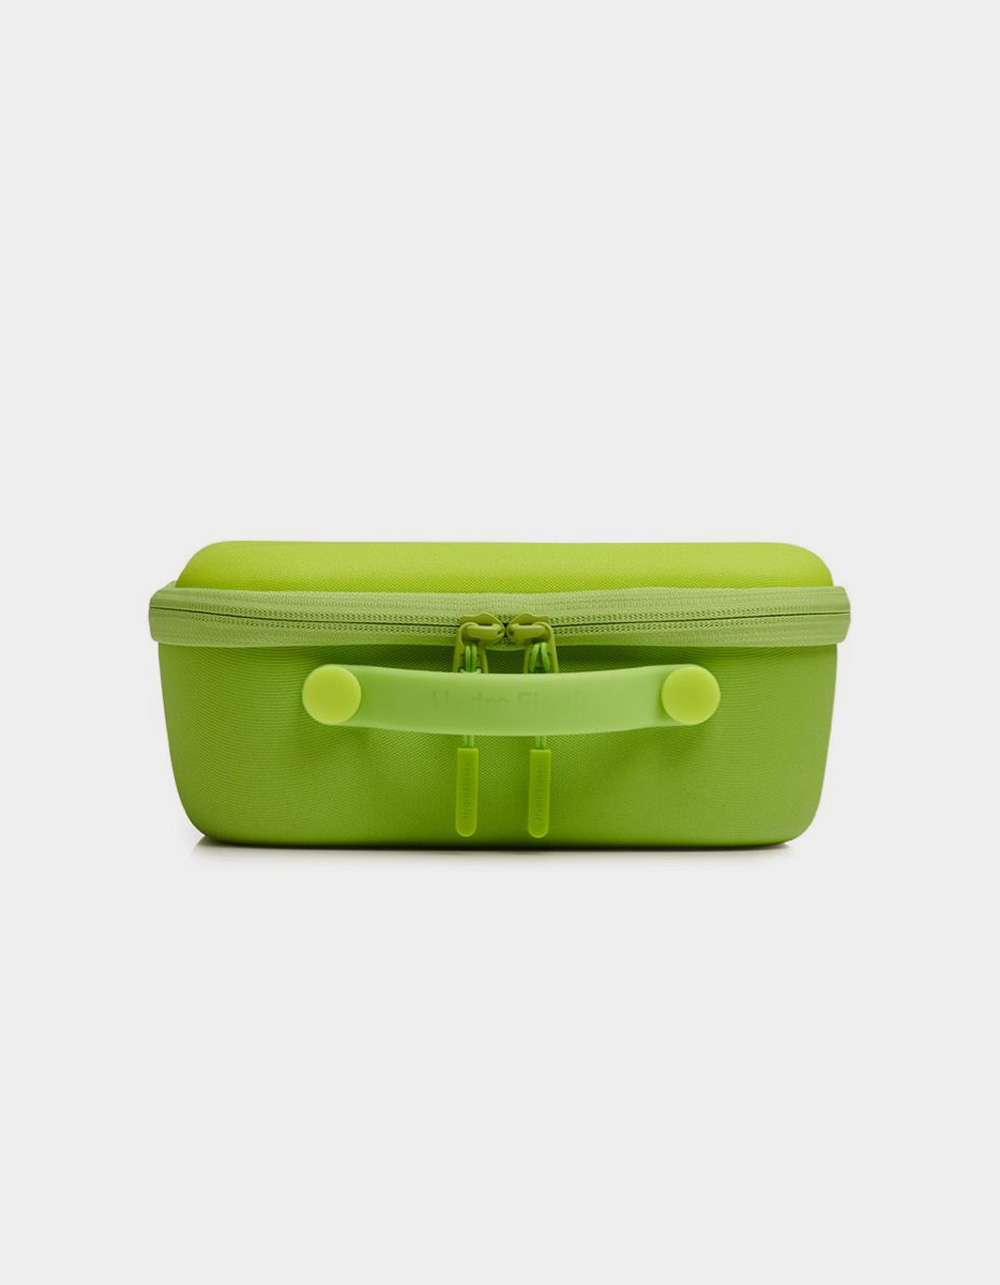 Hydro Flask on X: Yes #HydroFlask makes more than quality water bottles.  This lunch box has a storage capacity of 3.5 liters & includes layers of  insulation to keep your food cold